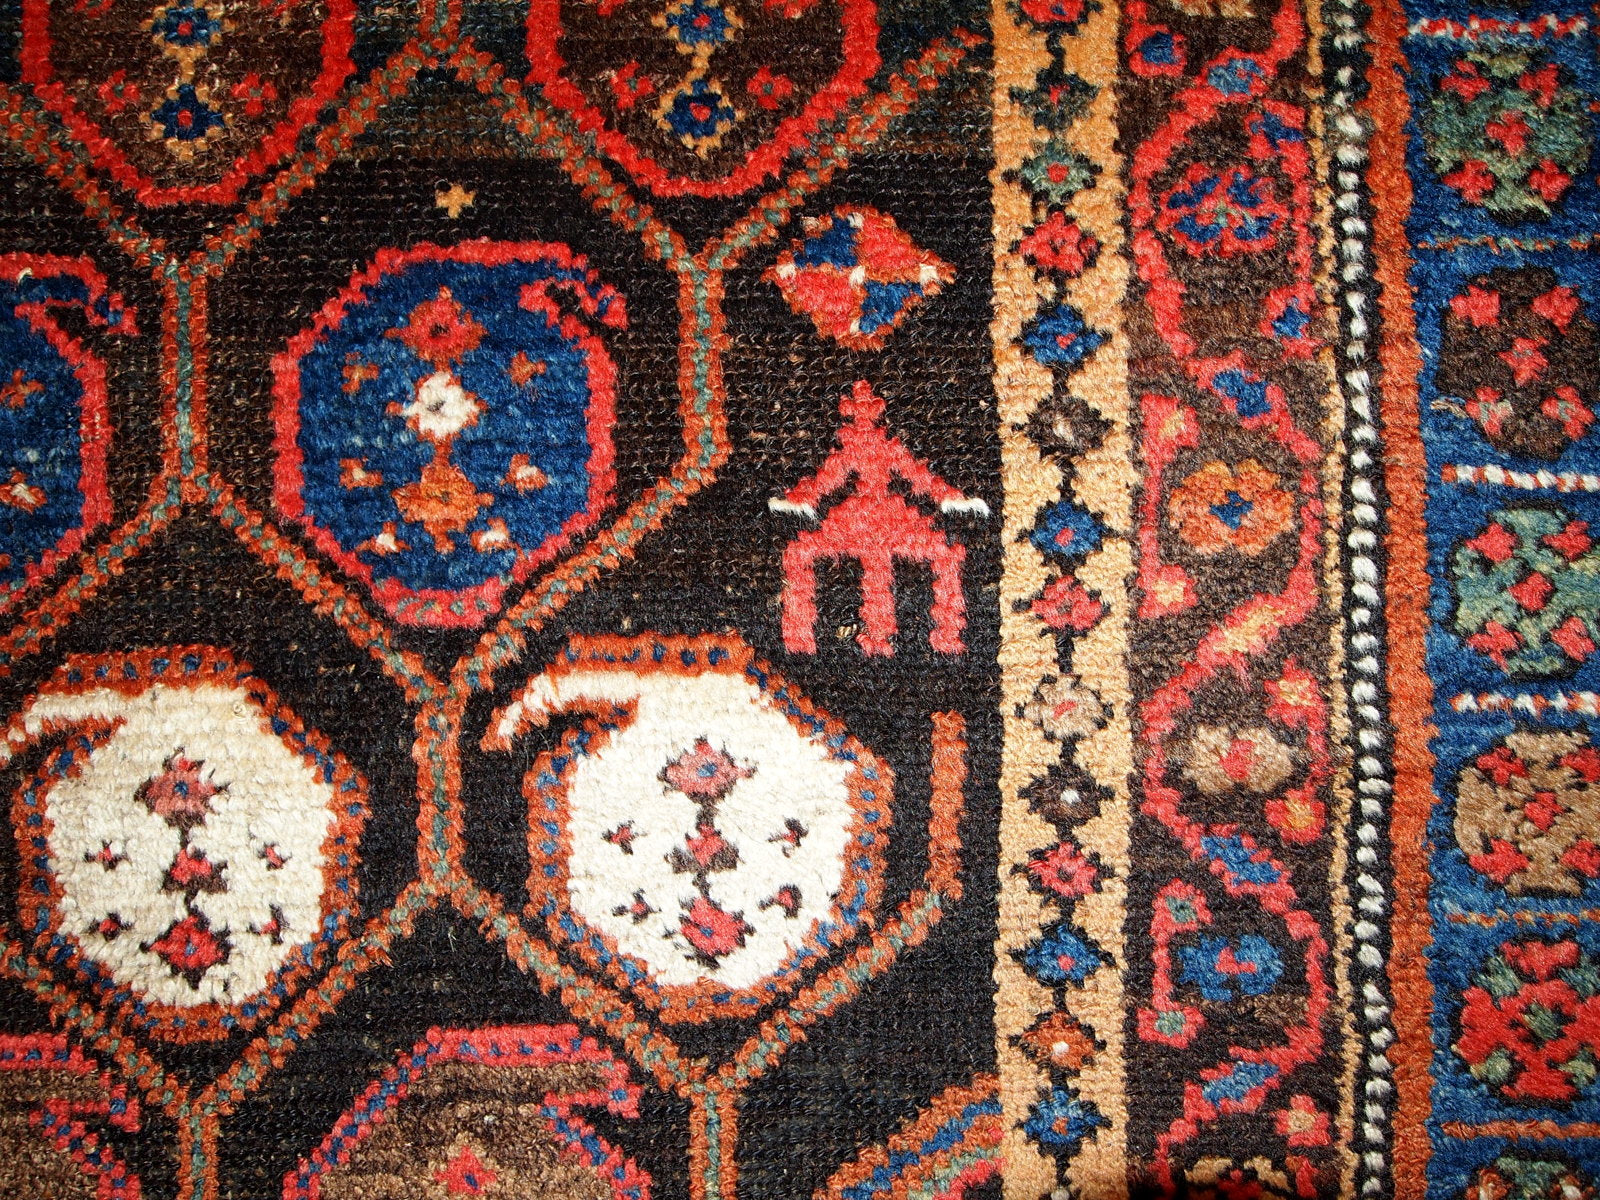 Antique Persian Kurdish rug in chocolate brown shade with repeating pattern. This rug is in original good condition.